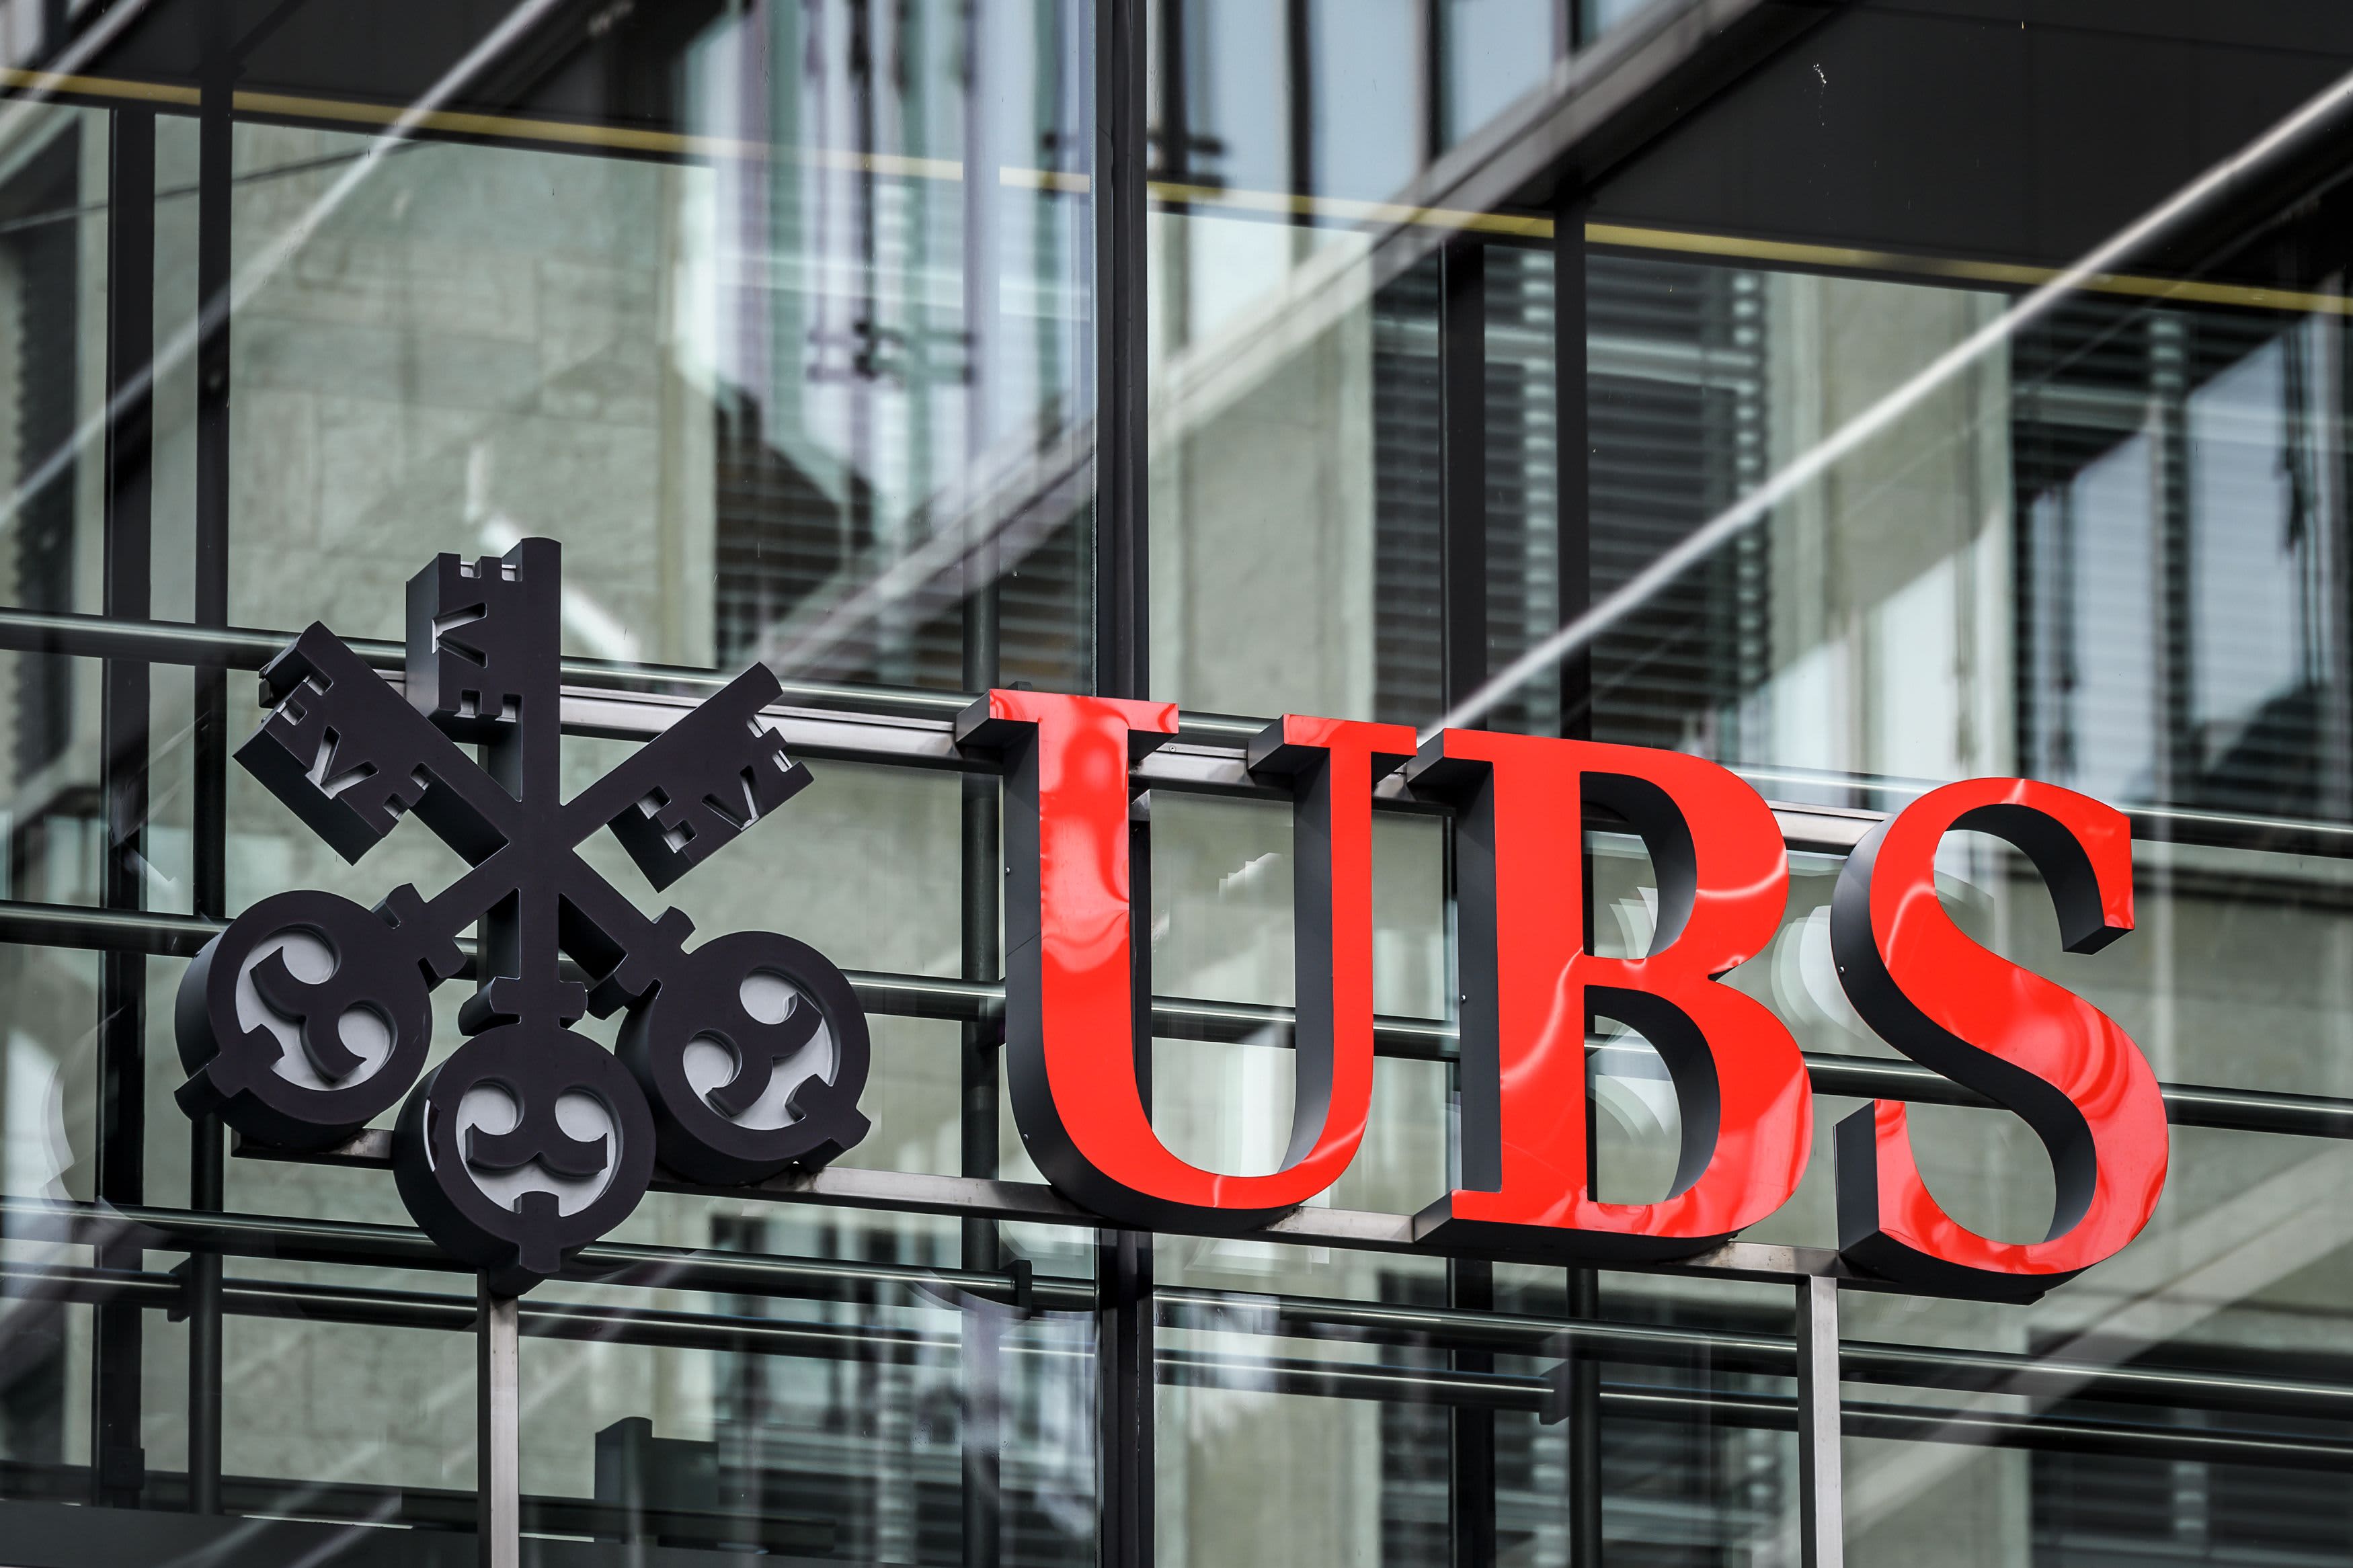 UBS explains economic and earnings trends affecting investors